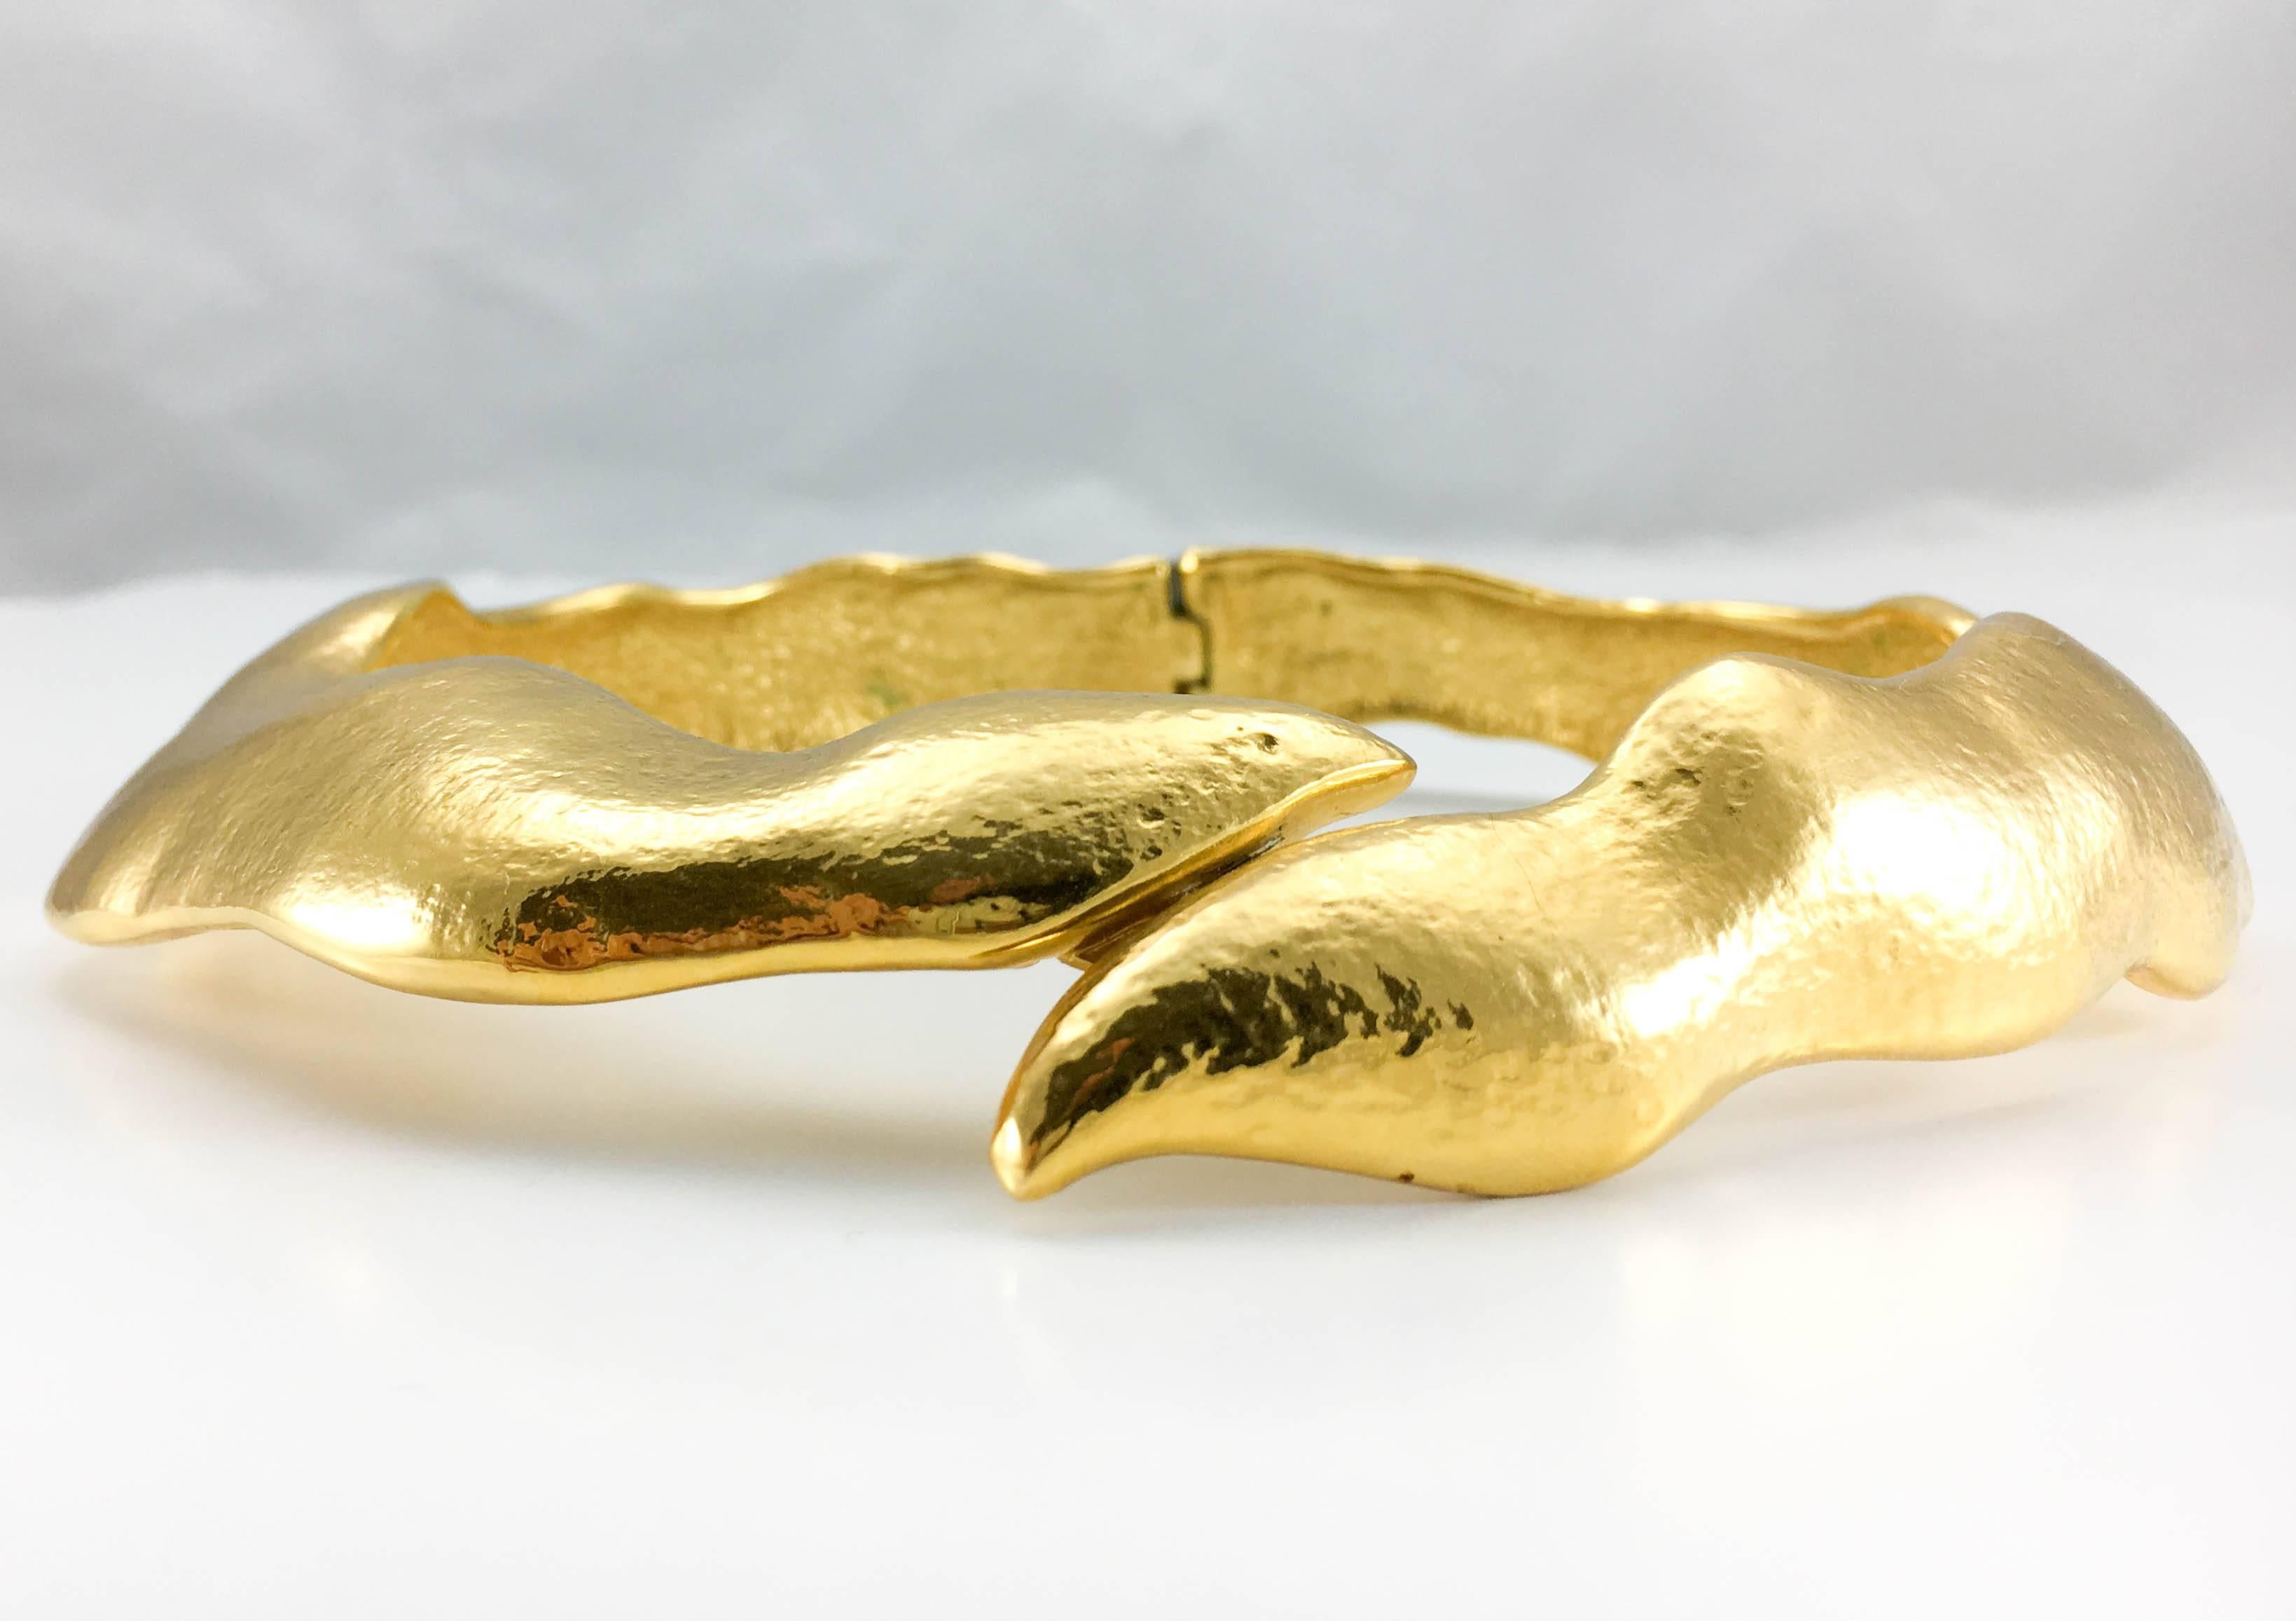 1992 Yves Saint Laurent Runway Look Gold-Plated Snake Necklace In Excellent Condition For Sale In London, Chelsea